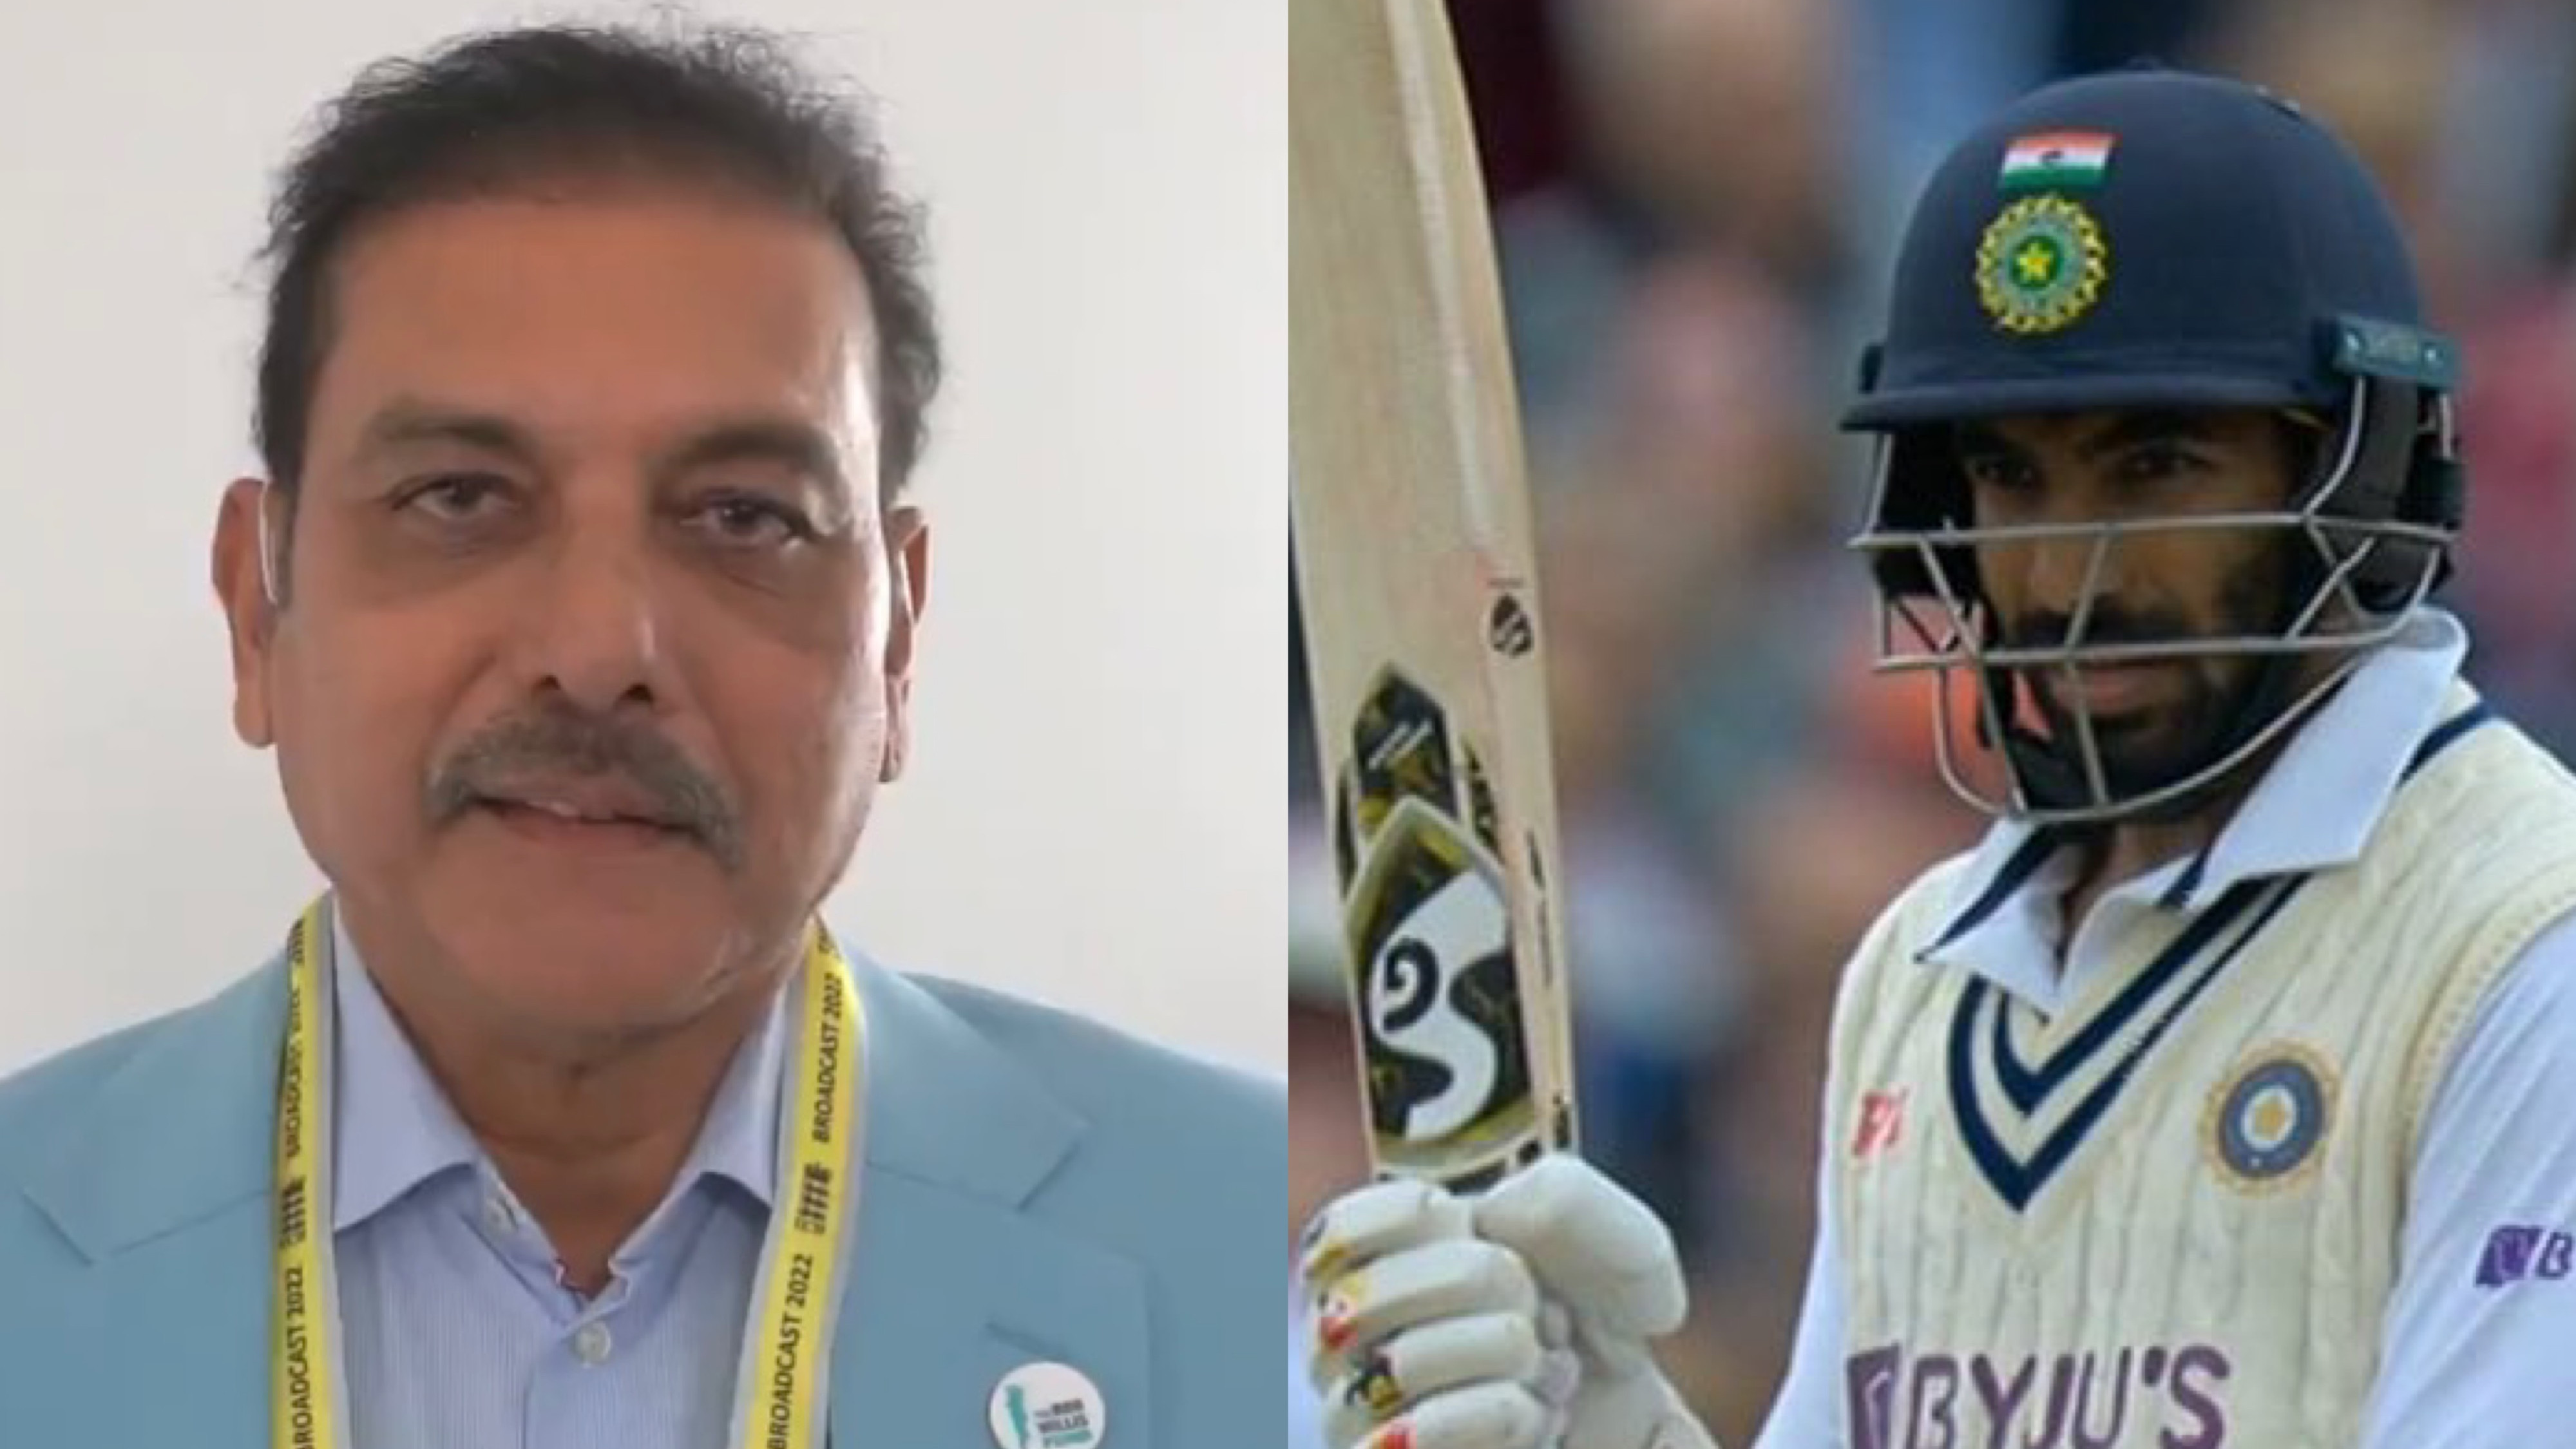 ENG v IND 2022: WATCH - Ravi Shastri heaps praises on Bumrah after he scores most runs in an over in Tests